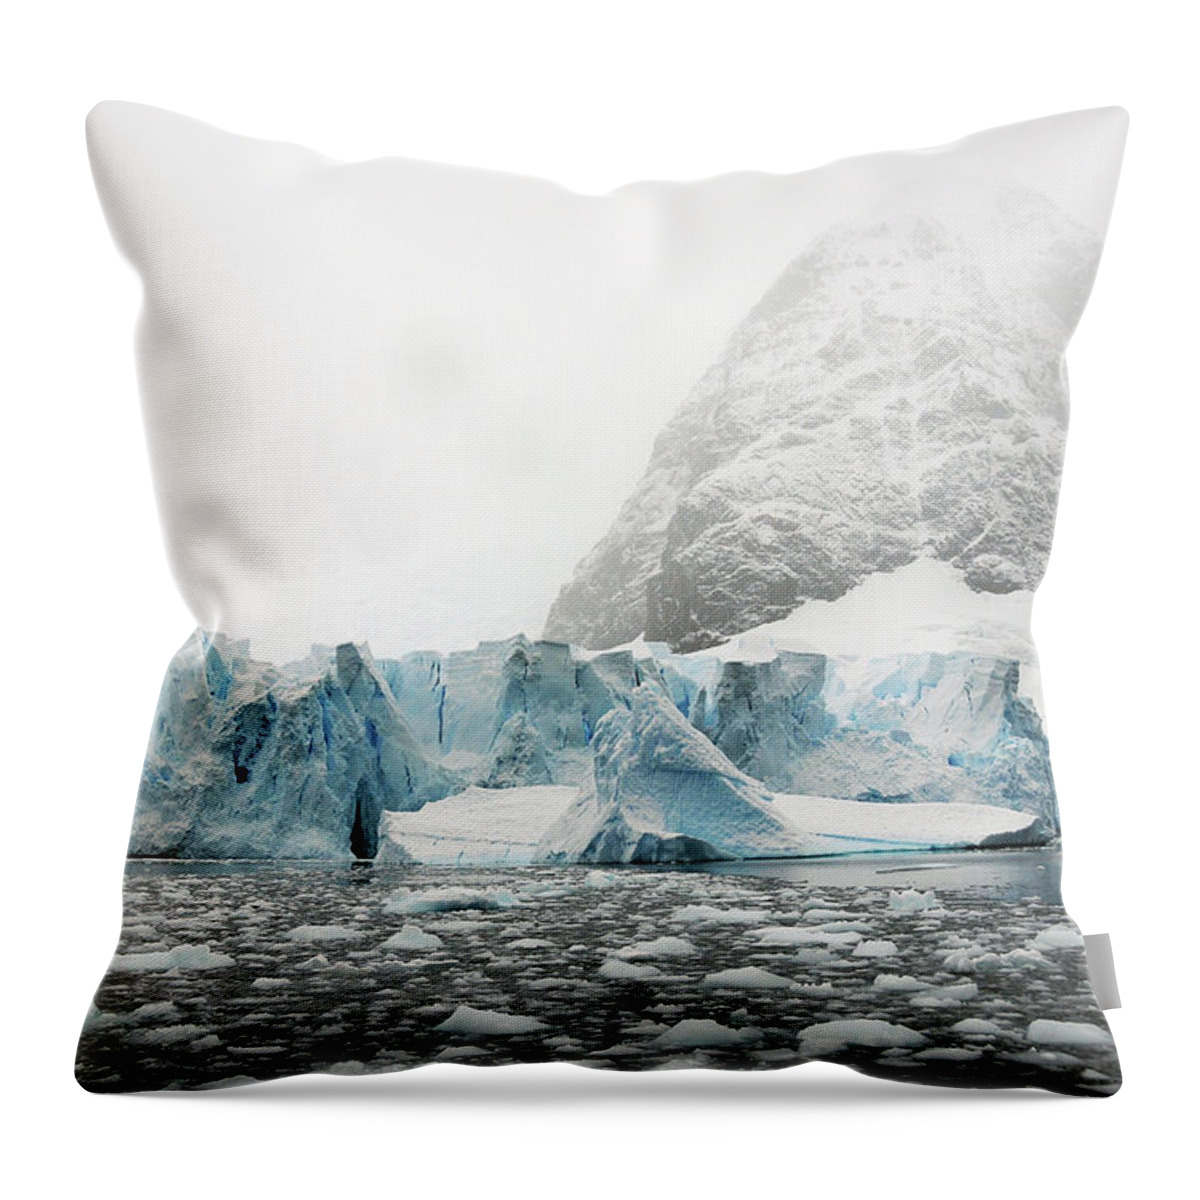 Scenics Throw Pillow featuring the photograph Glaciers And Ice In Paradise Bay by Bill Raften